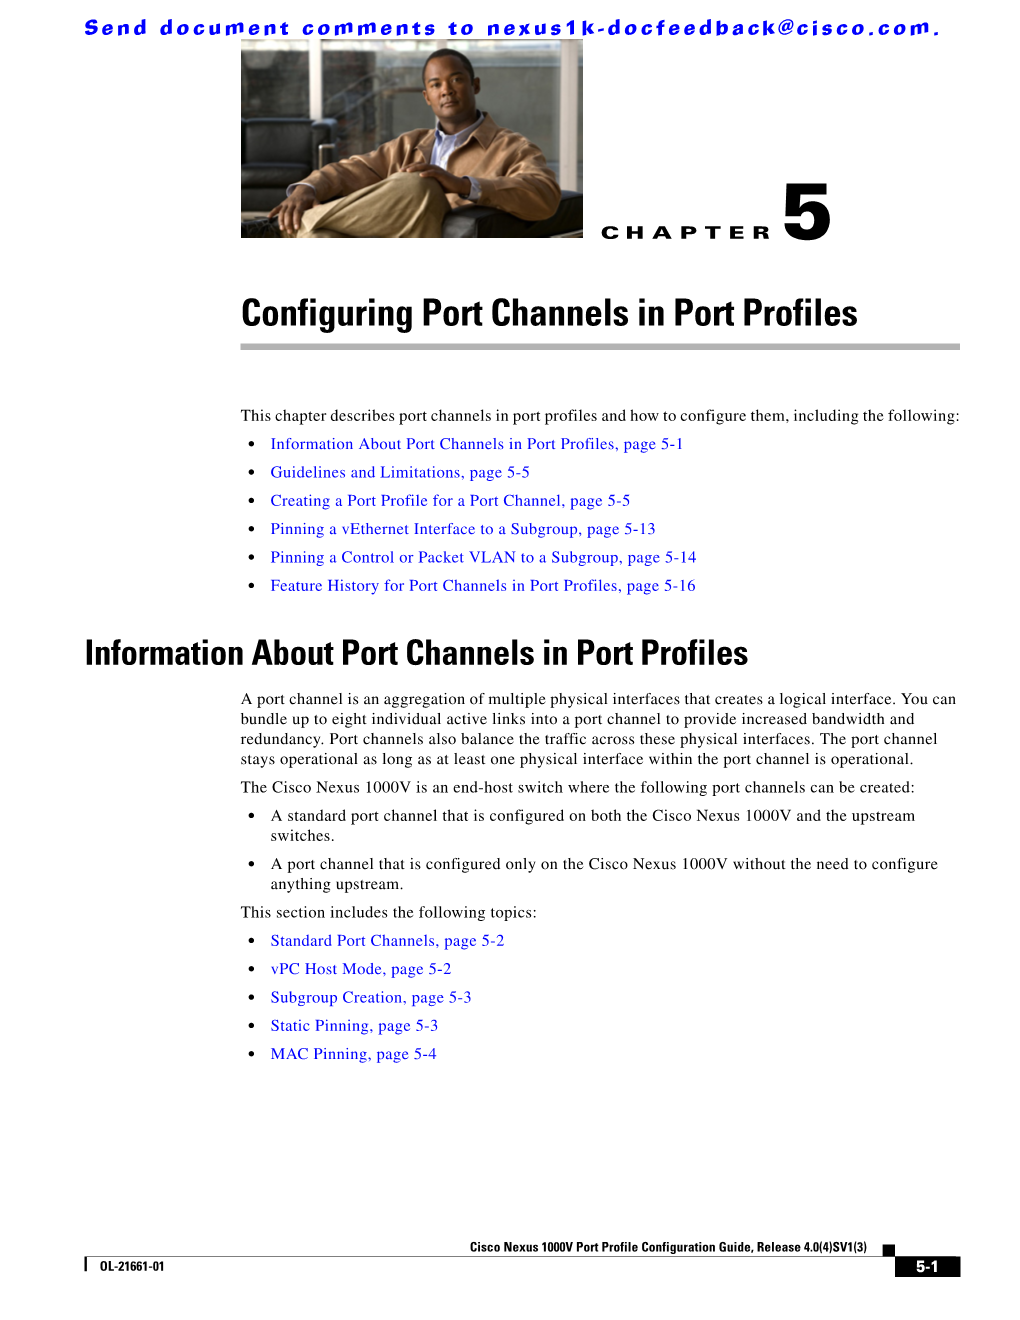 Configuring Port Channels in Port Profiles